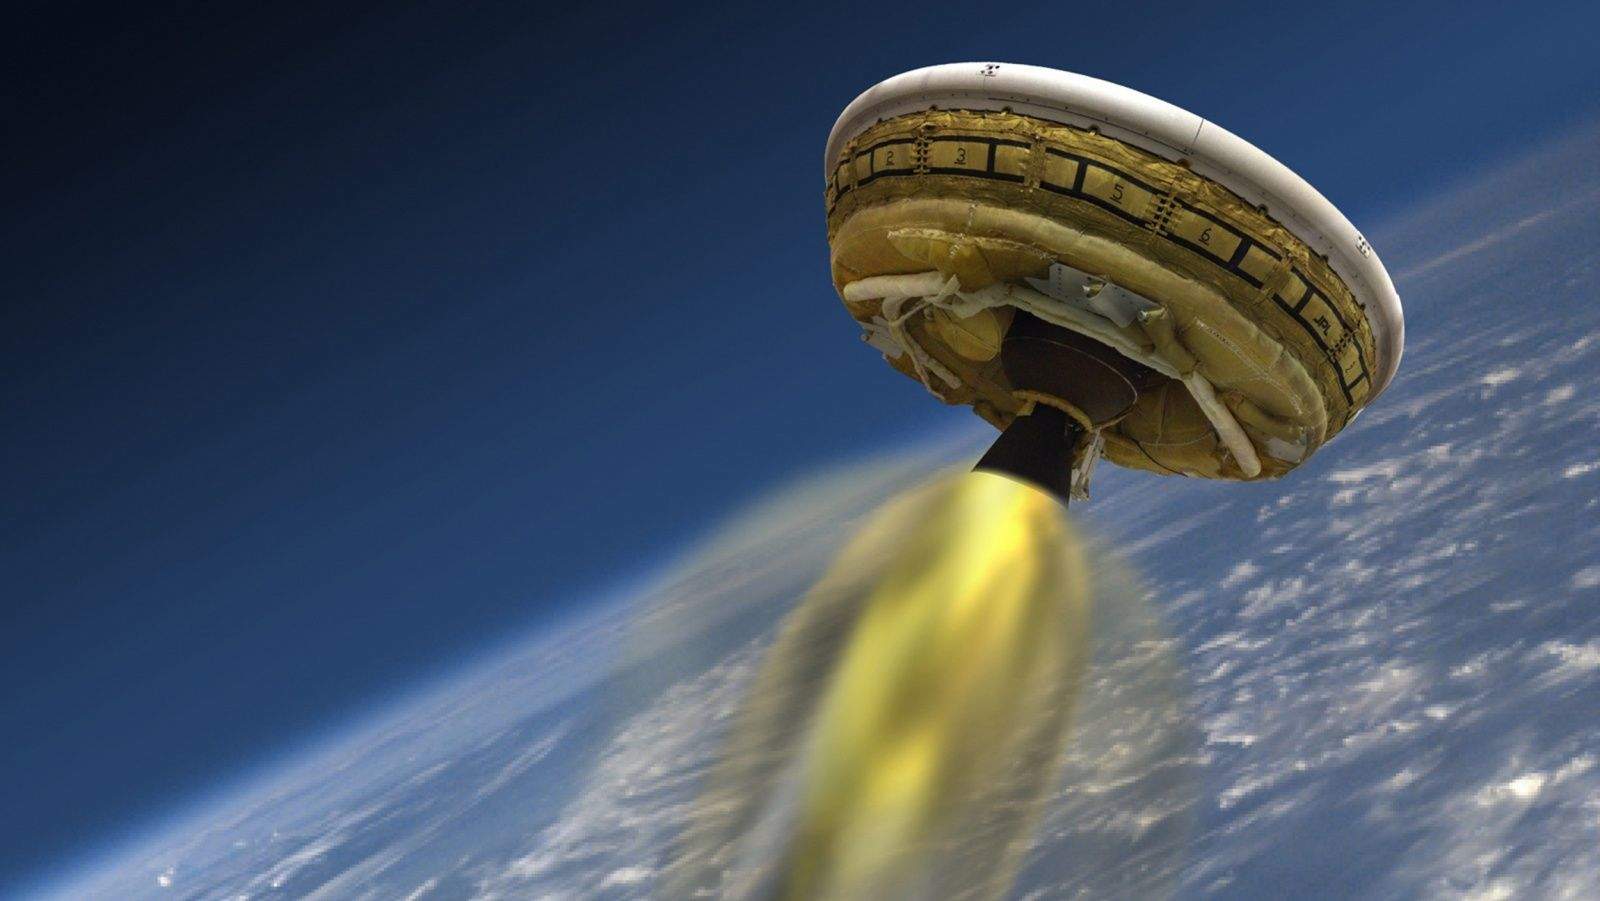 NASA is testing a saucer-like space craft that could bring heavy payloads to Mars. Photo illustration: NASA/JPL-Caltech